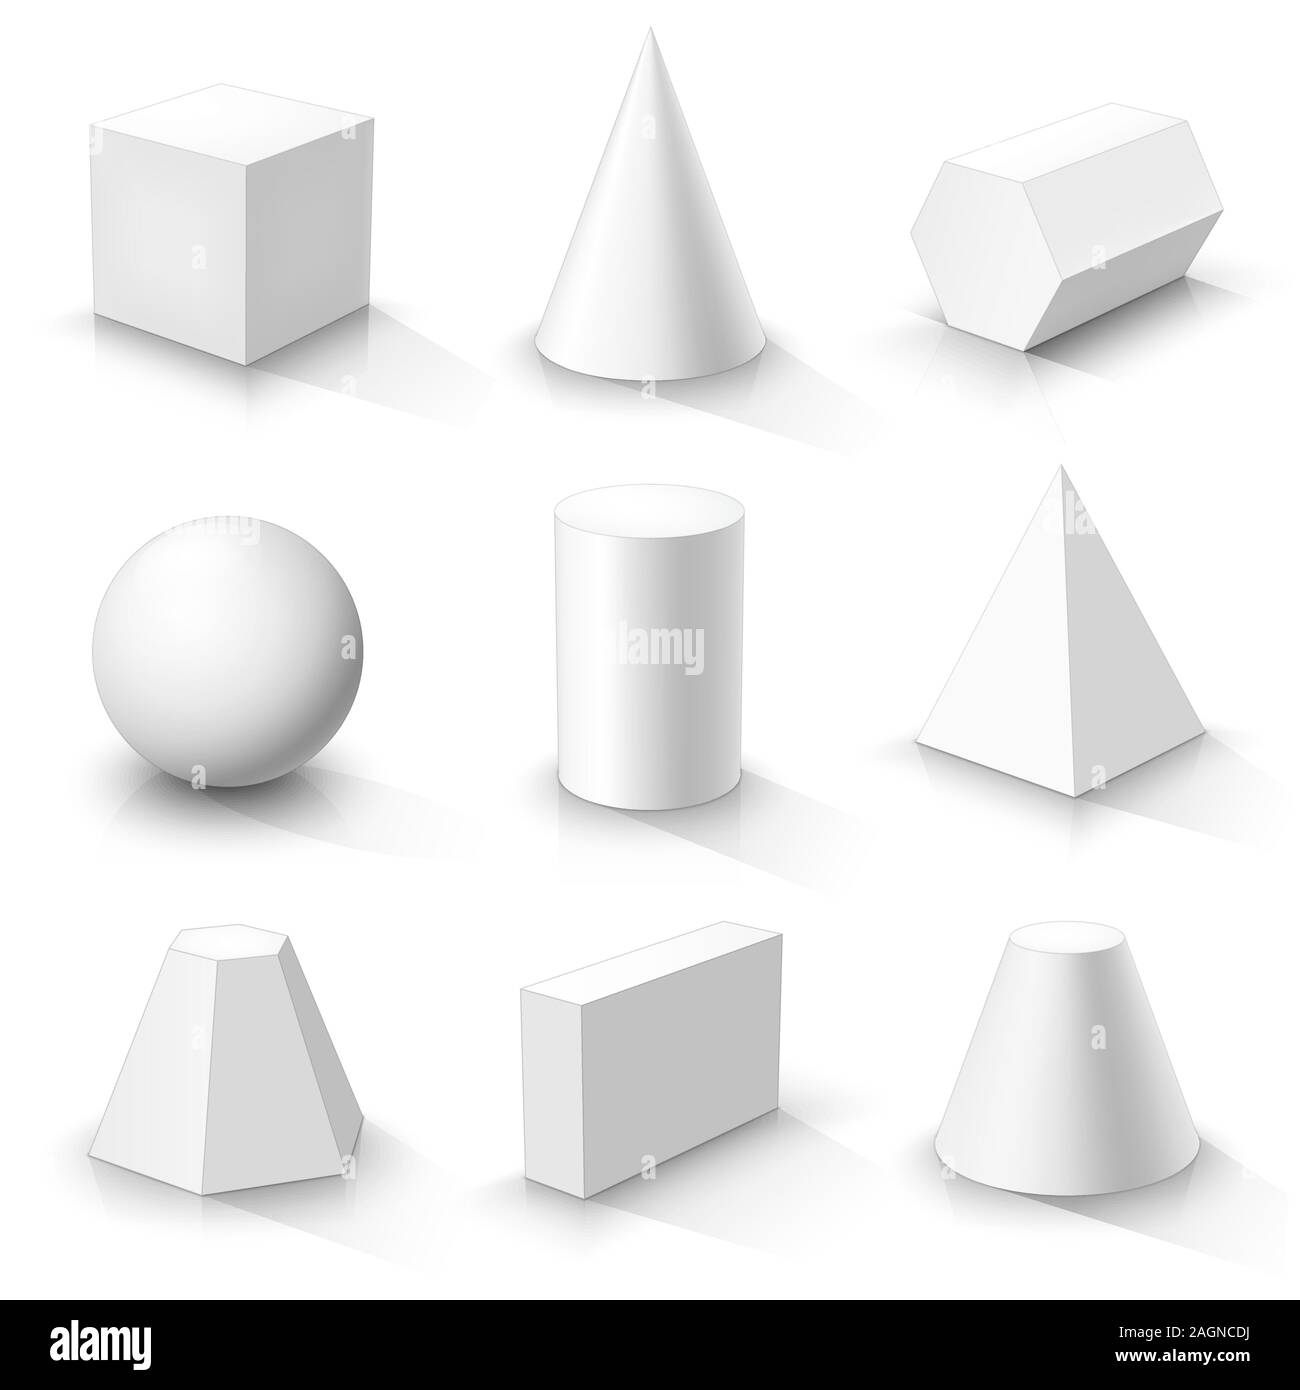 Set of basic 3d shapes. White geometric solids on a white ...